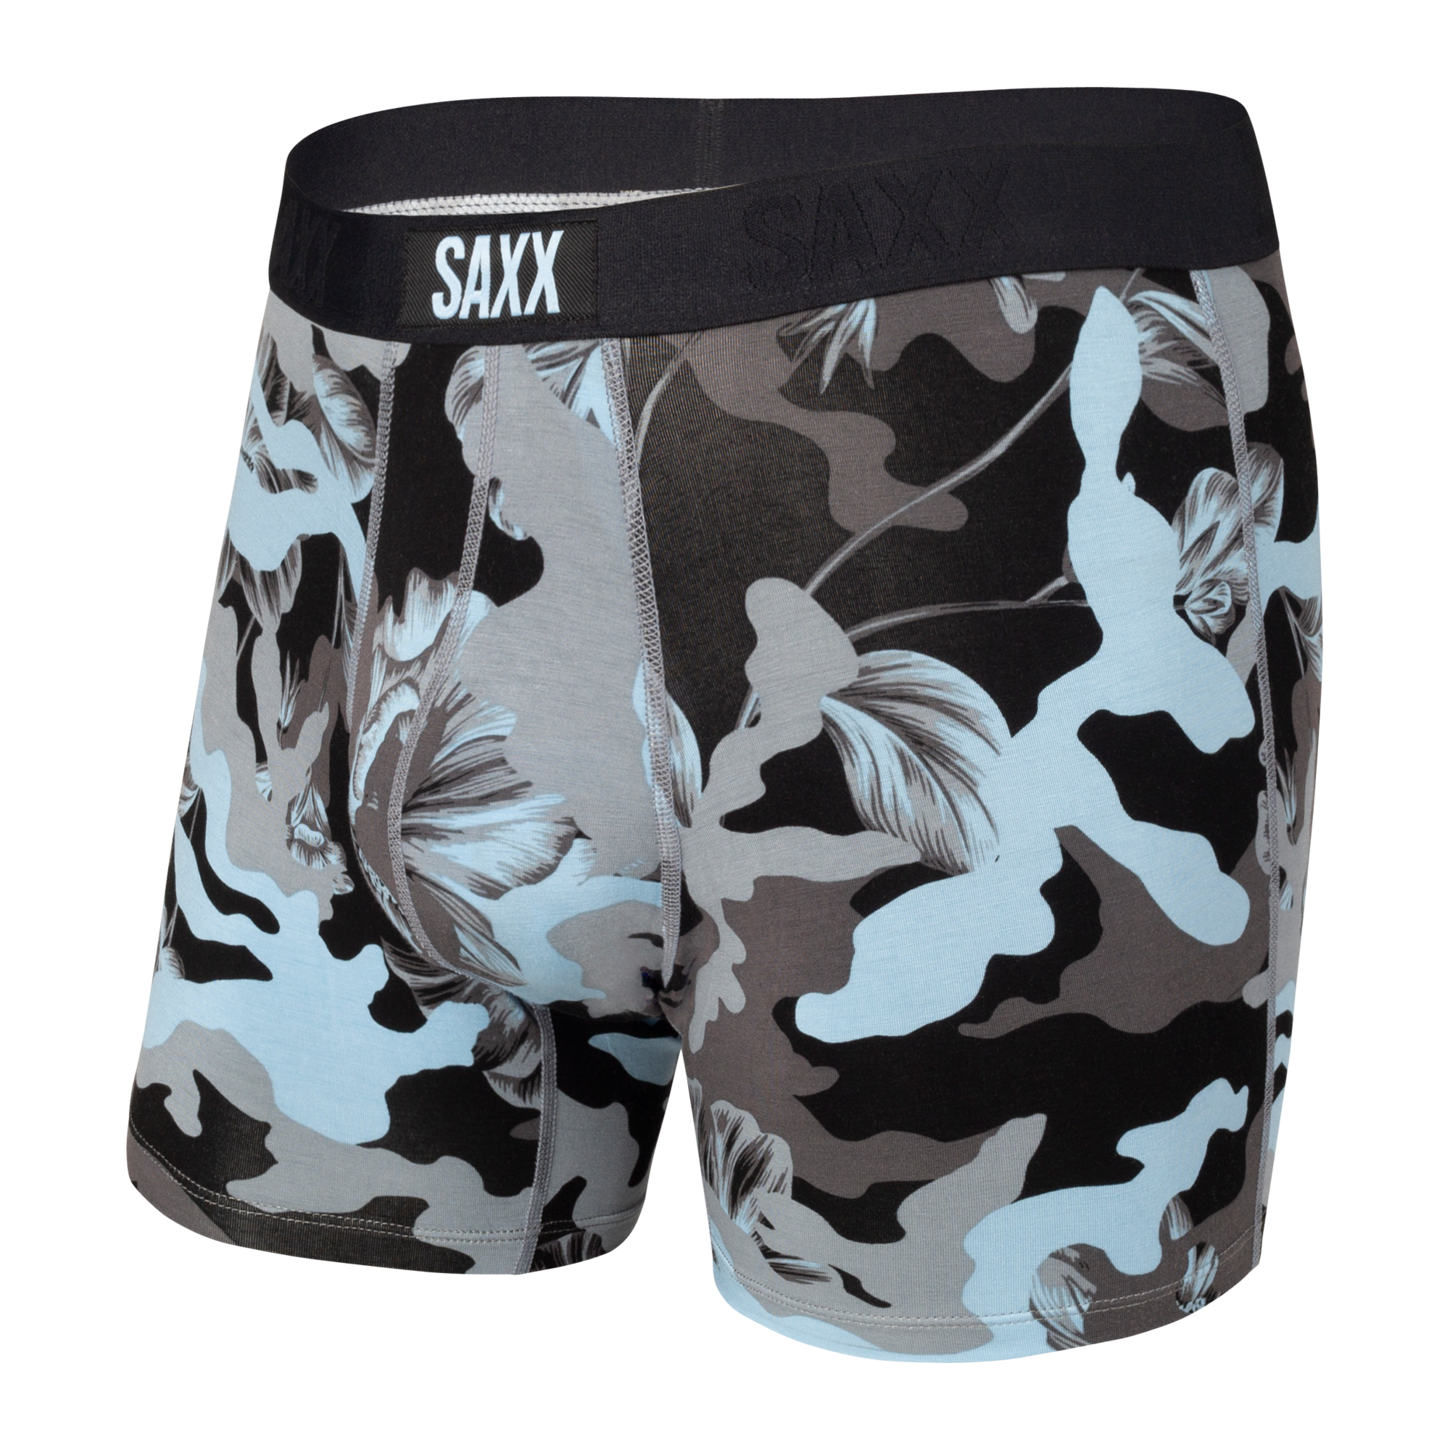 SAXX - Vibe - Island Soul (SXBM35 ISM) - Ford and McIntyre Men's Wear